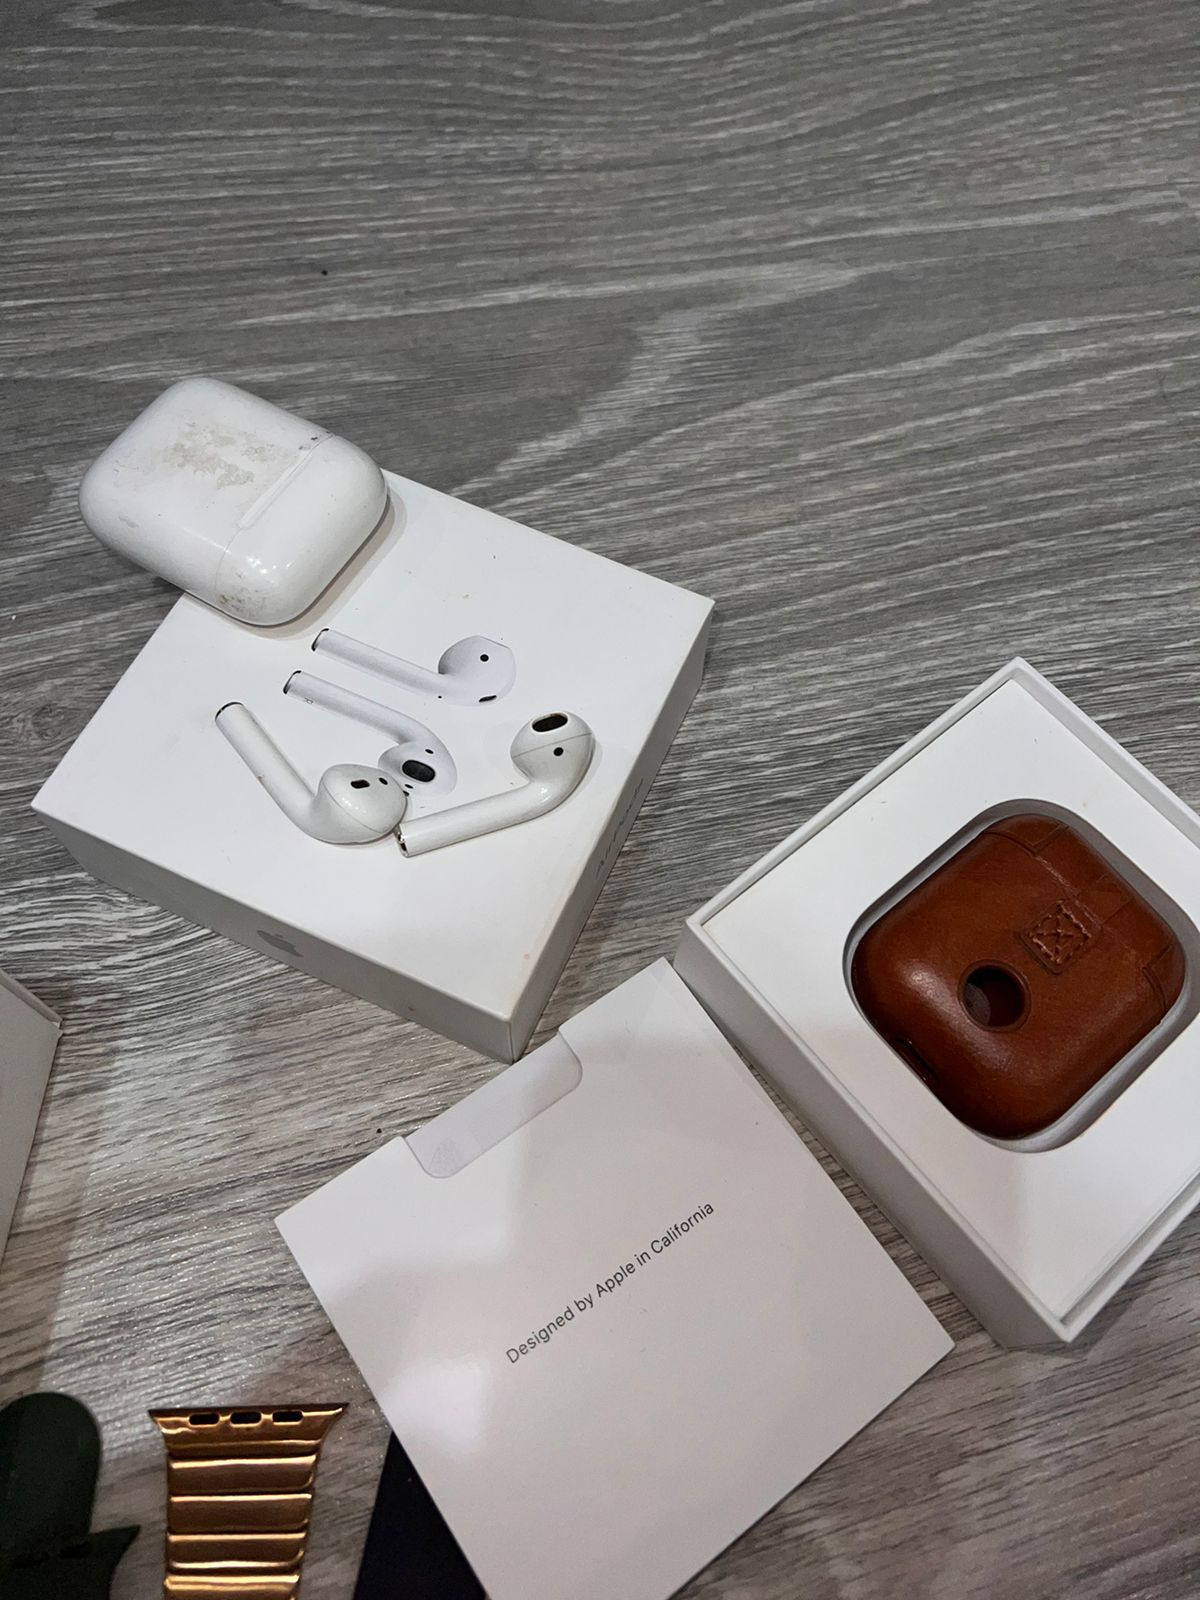 Watch ve airpods satisi